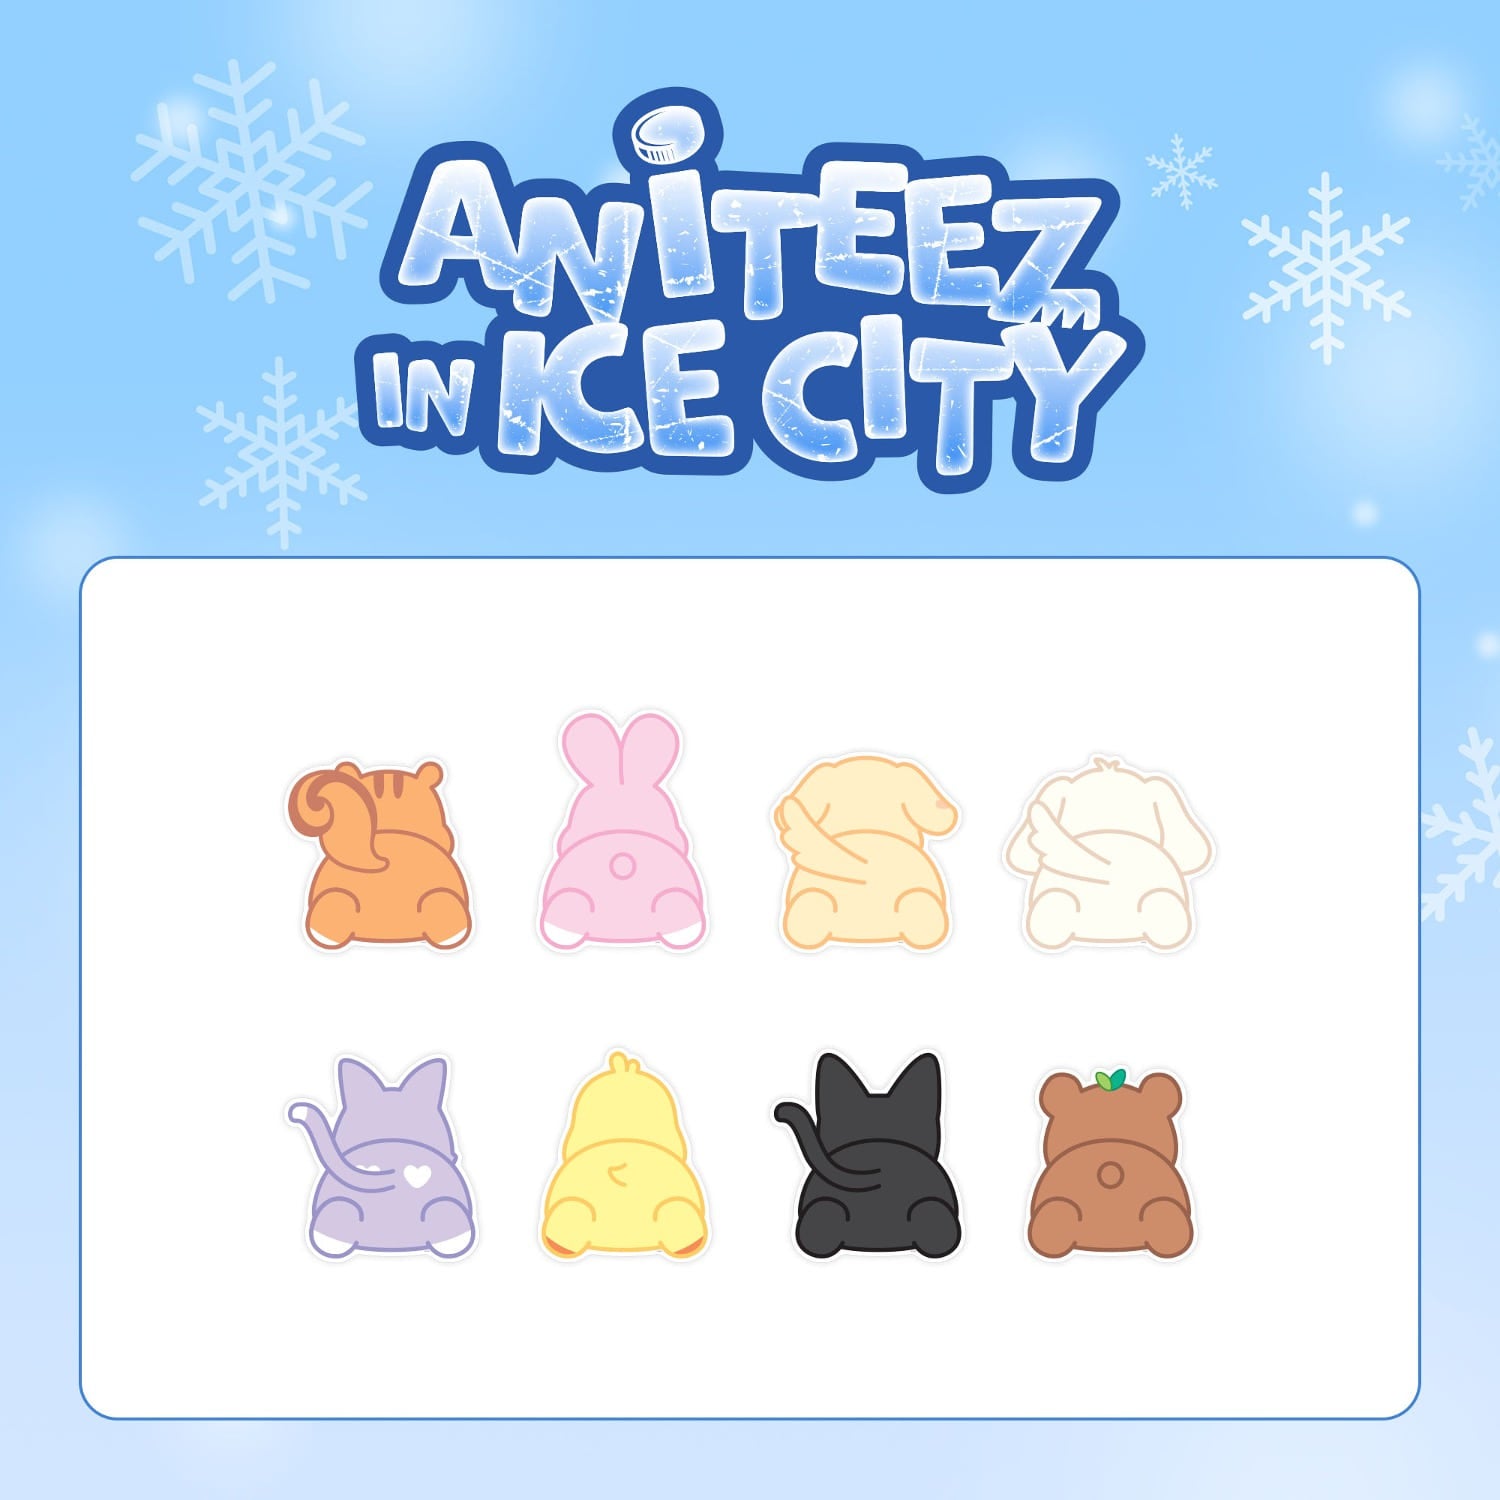 ATEEZ - ATEEZ X ANITEEZ IN ICE CITY OFFICIAL MD MOUSE PAD